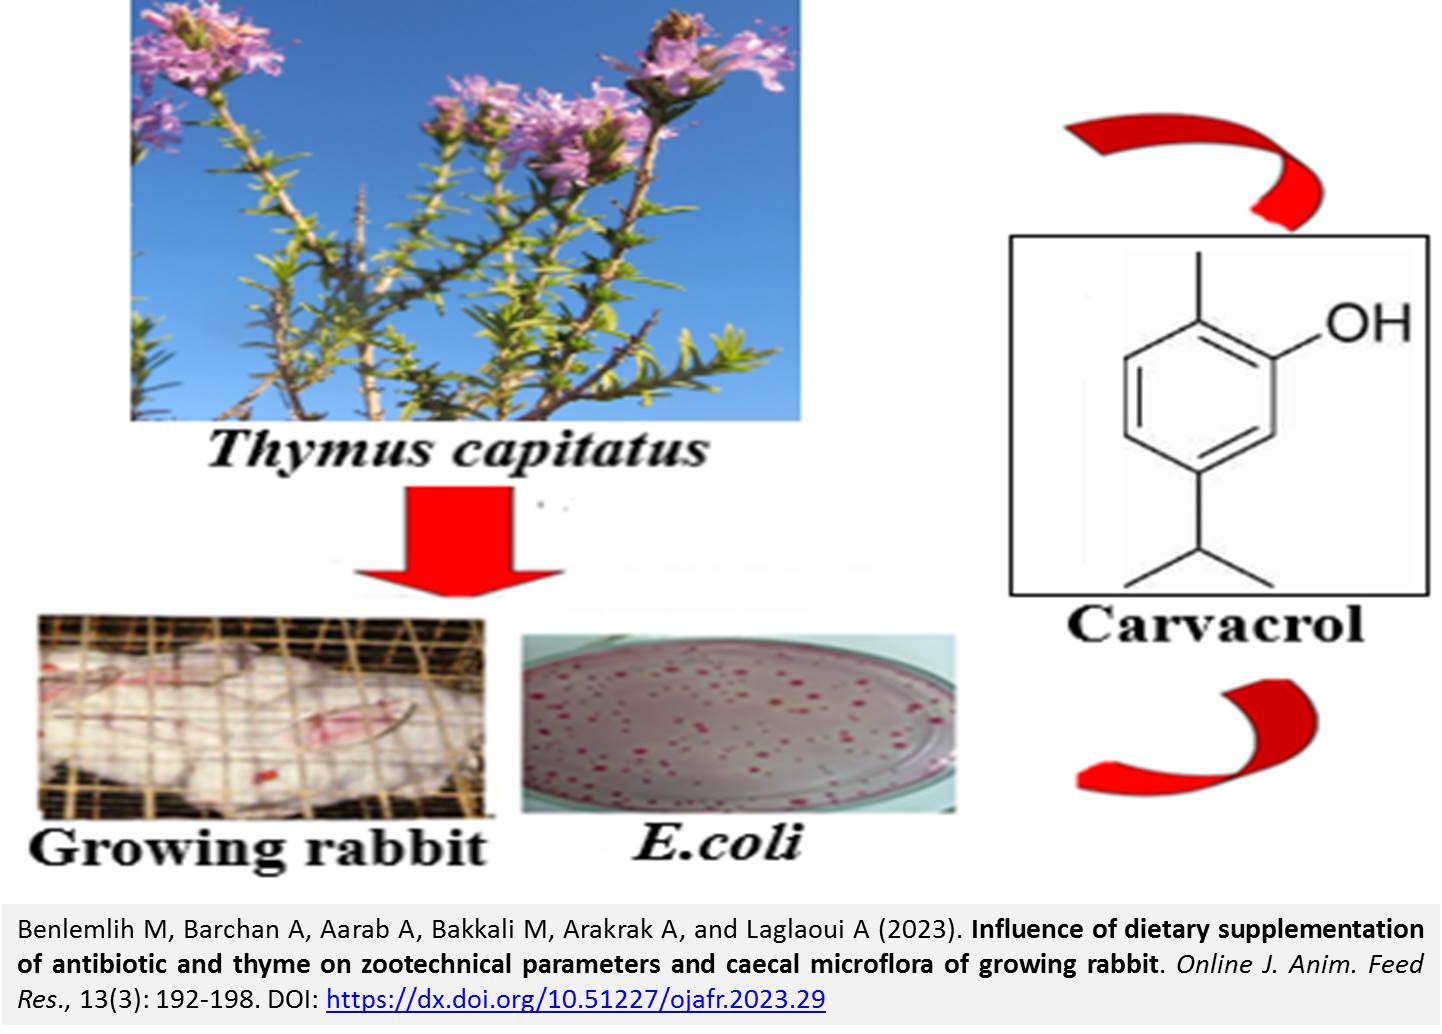 174-dietary_supplementation_of_antibiotic_and_thyme_on_rabbit